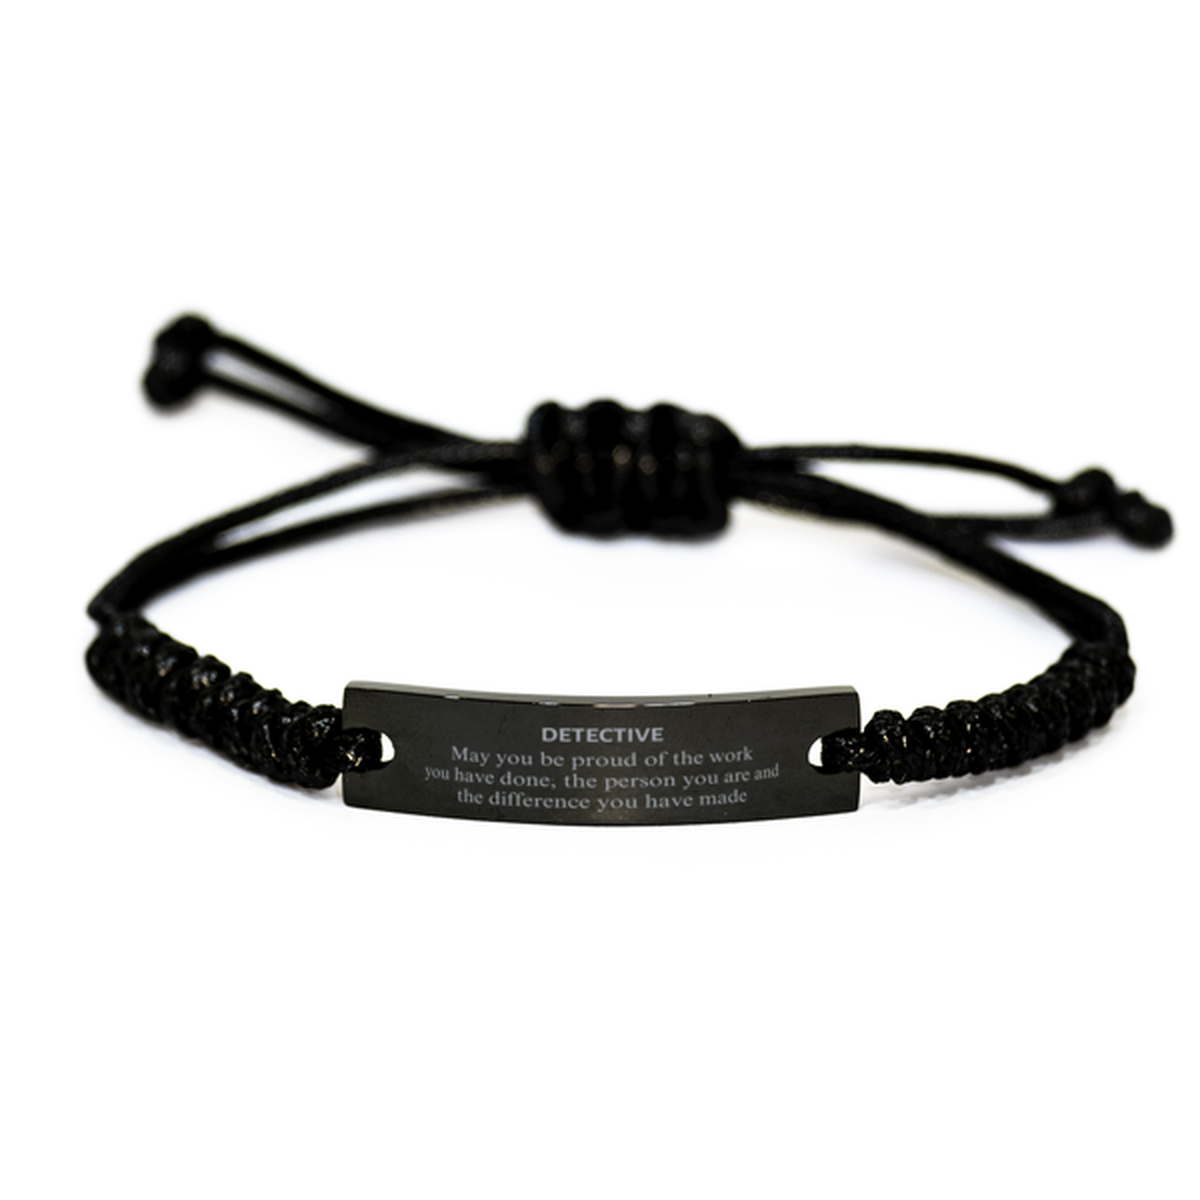 Detective May you be proud of the work you have done, Retirement Detective Black Rope Bracelet for Colleague Appreciation Gifts Amazing for Detective